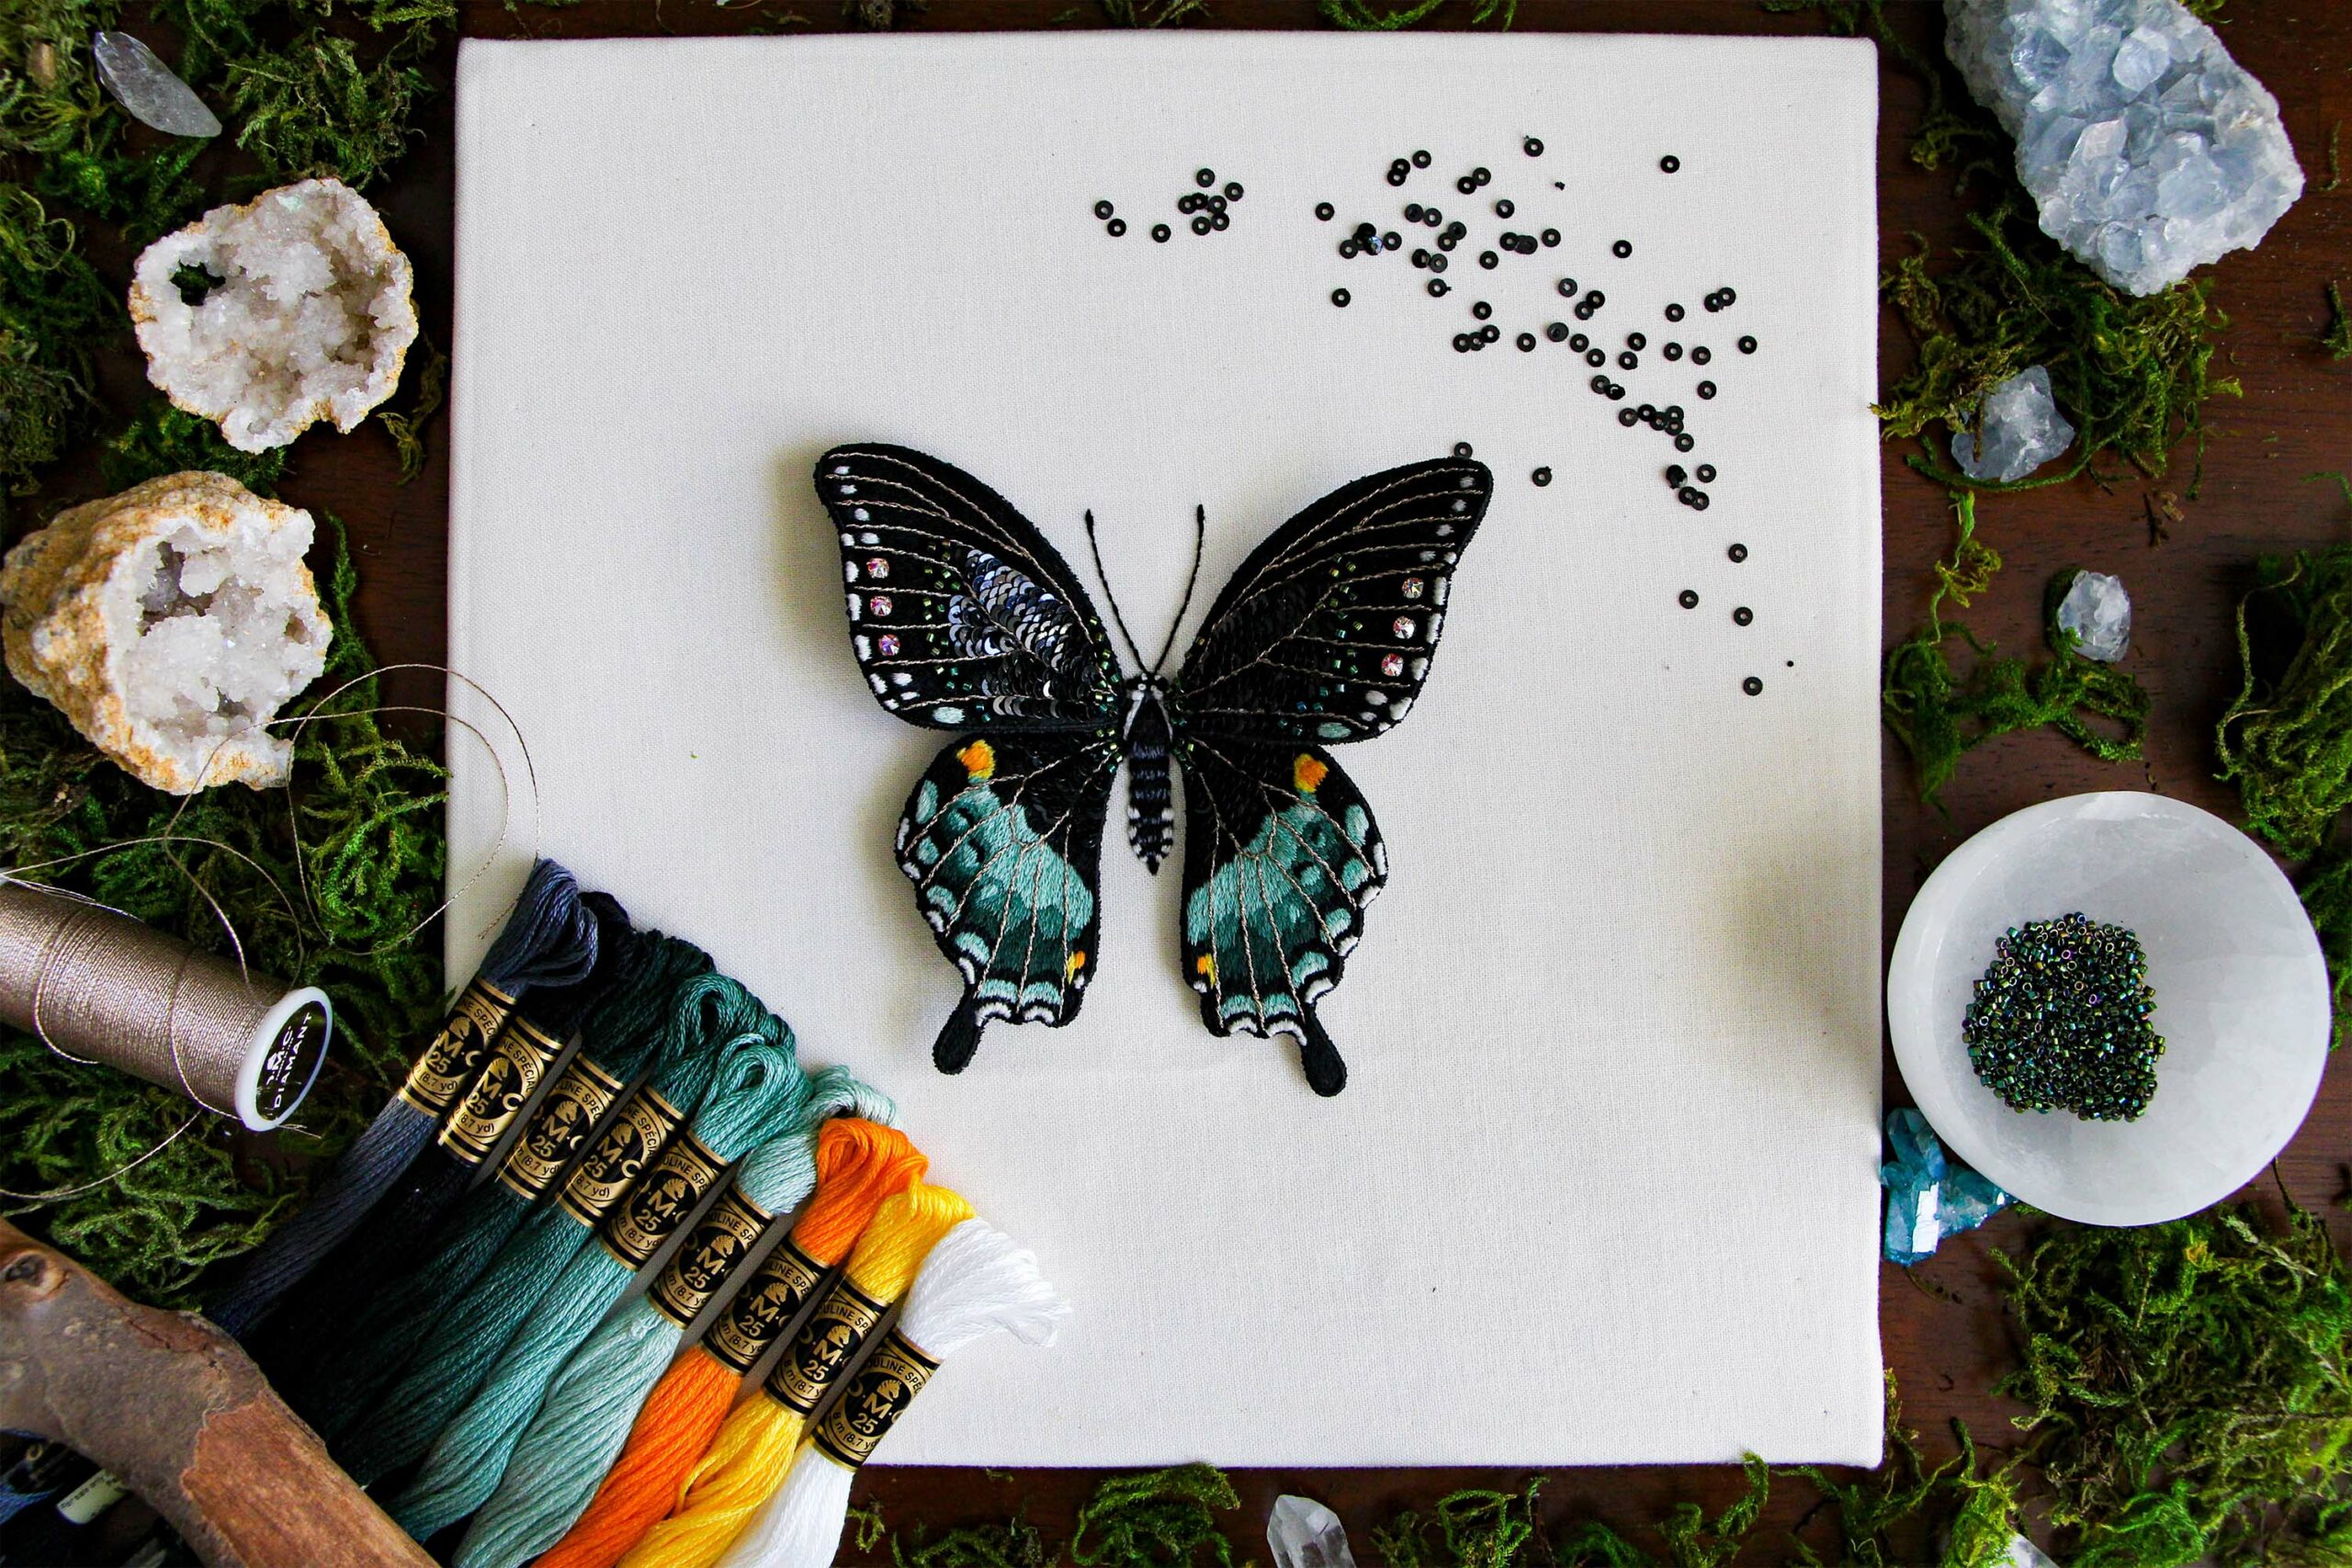 The finished 3D Spicebush Swallowtail embroidery with DMC thread colors